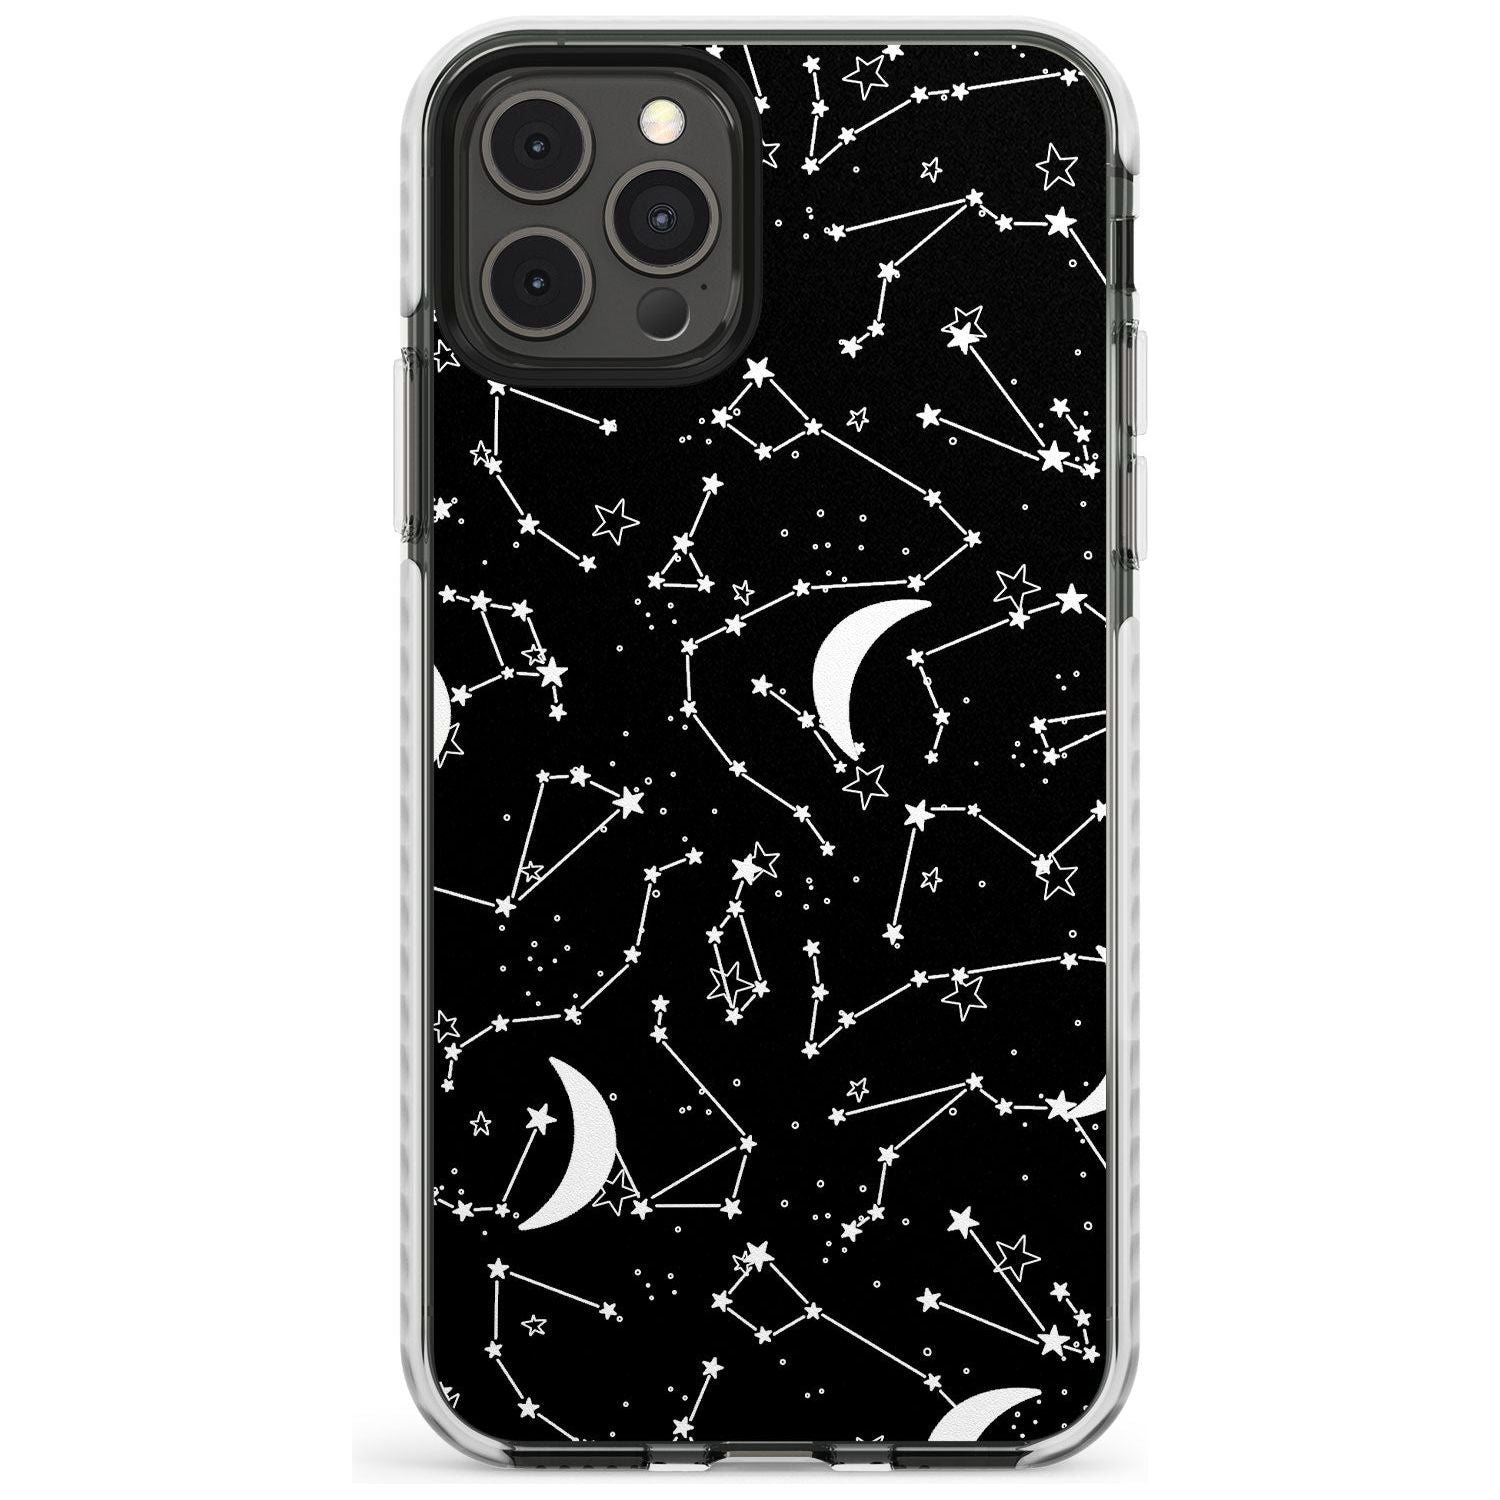 White Constellations on Black Slim TPU Phone Case for iPhone 11 Pro Max